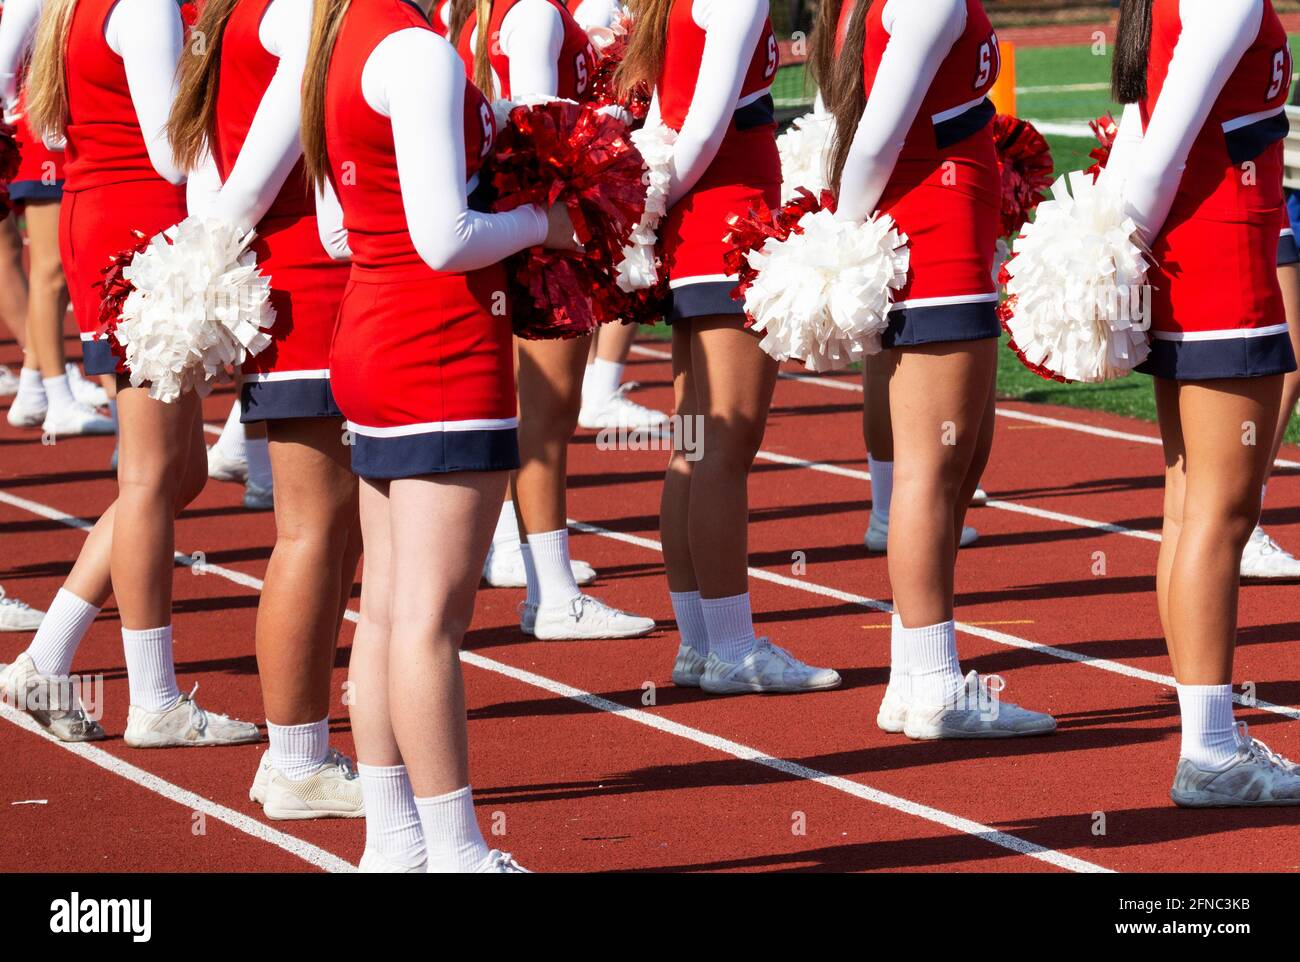 https://c8.alamy.com/comp/2FNC3KB/rear-view-of-high-school-cheerleaders-holding-pom-poms-standing-on-a-red-track-facing-the-field-during-a-football-game-2FNC3KB.jpg